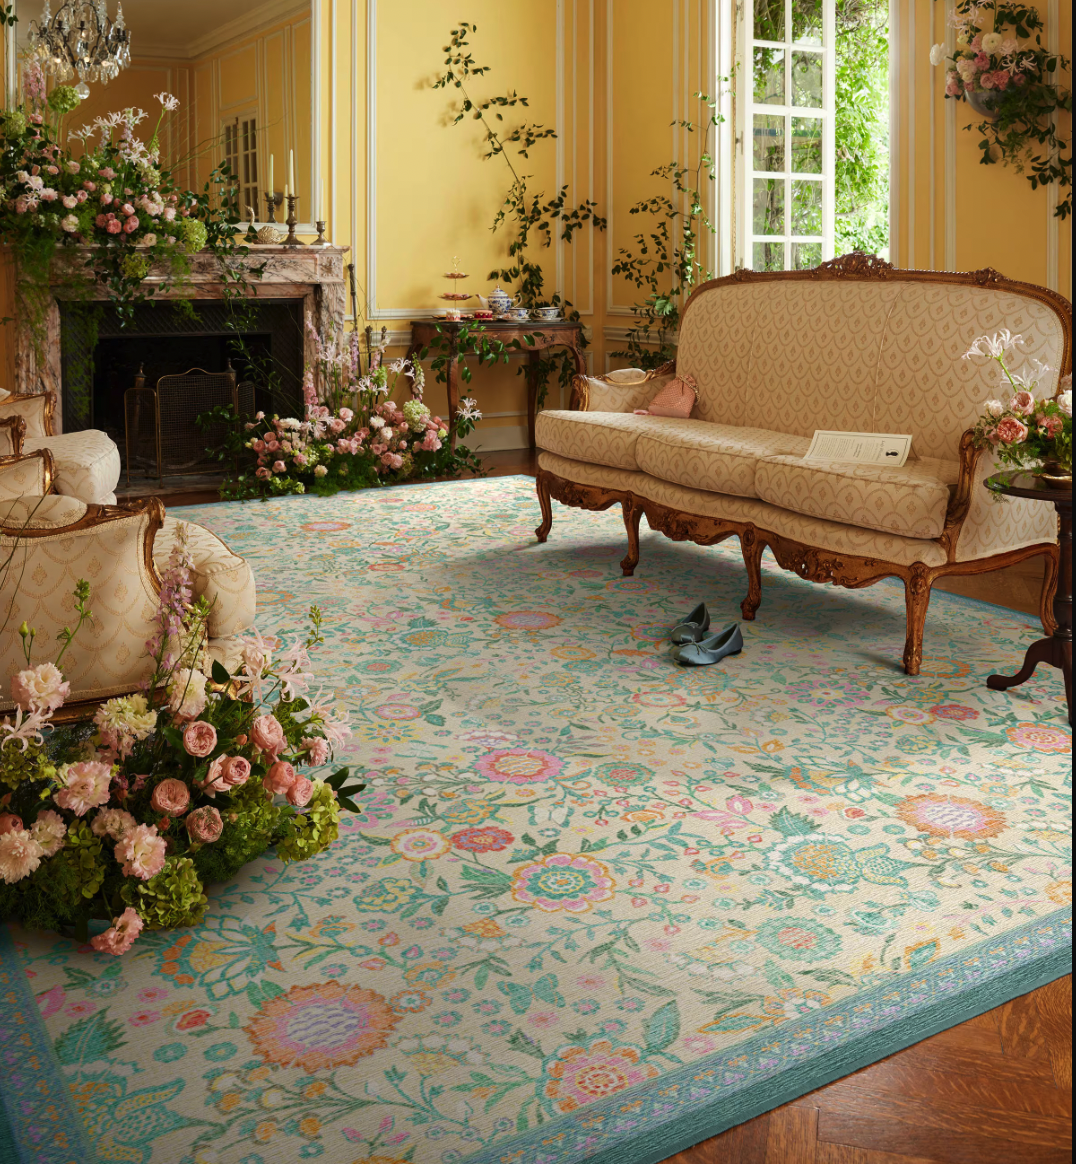 Ruggable rug set on floor in decorated room